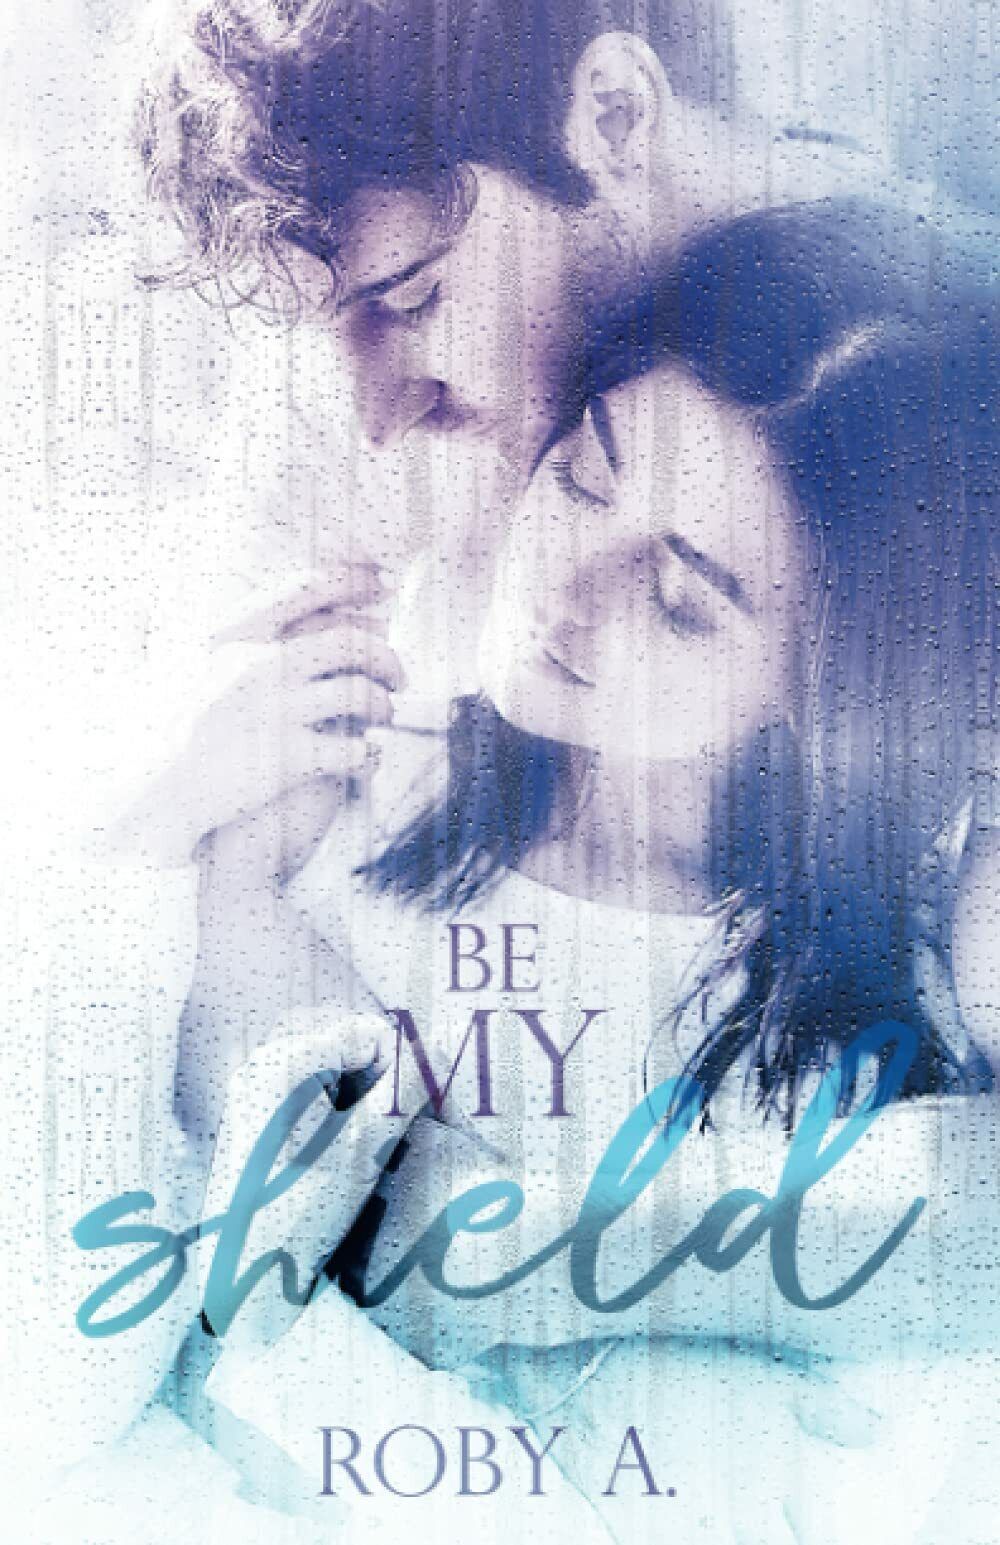 Be my shield di Roby A.,  2021,  Indipendently Published